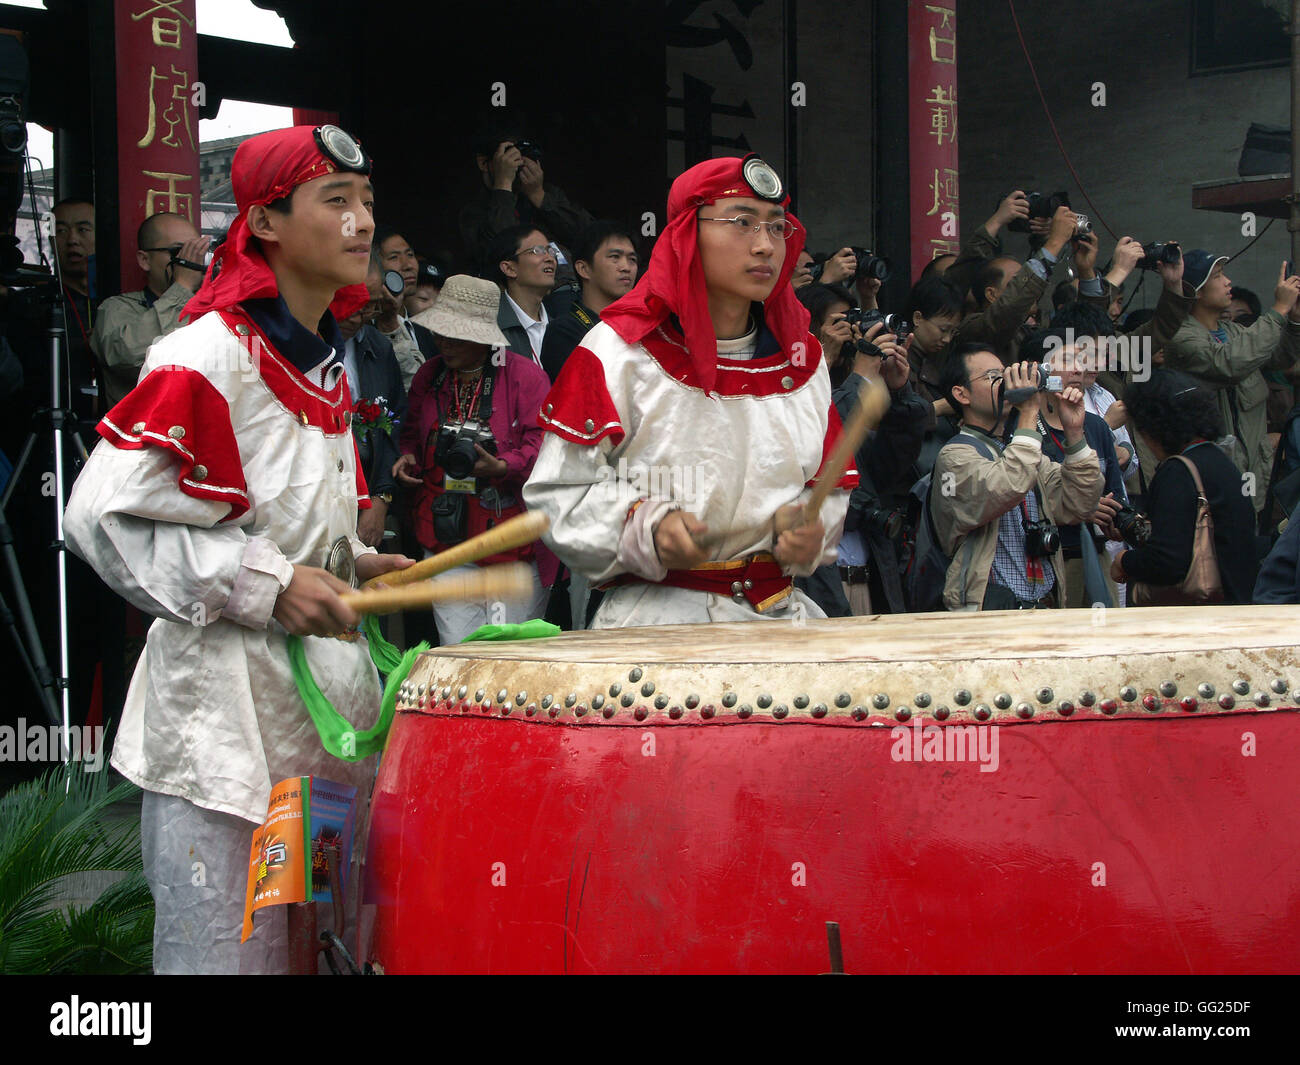 Drummers at the Opening Ceremony of the Pingyao Photography Festival. Pingyao China. Stock Photo